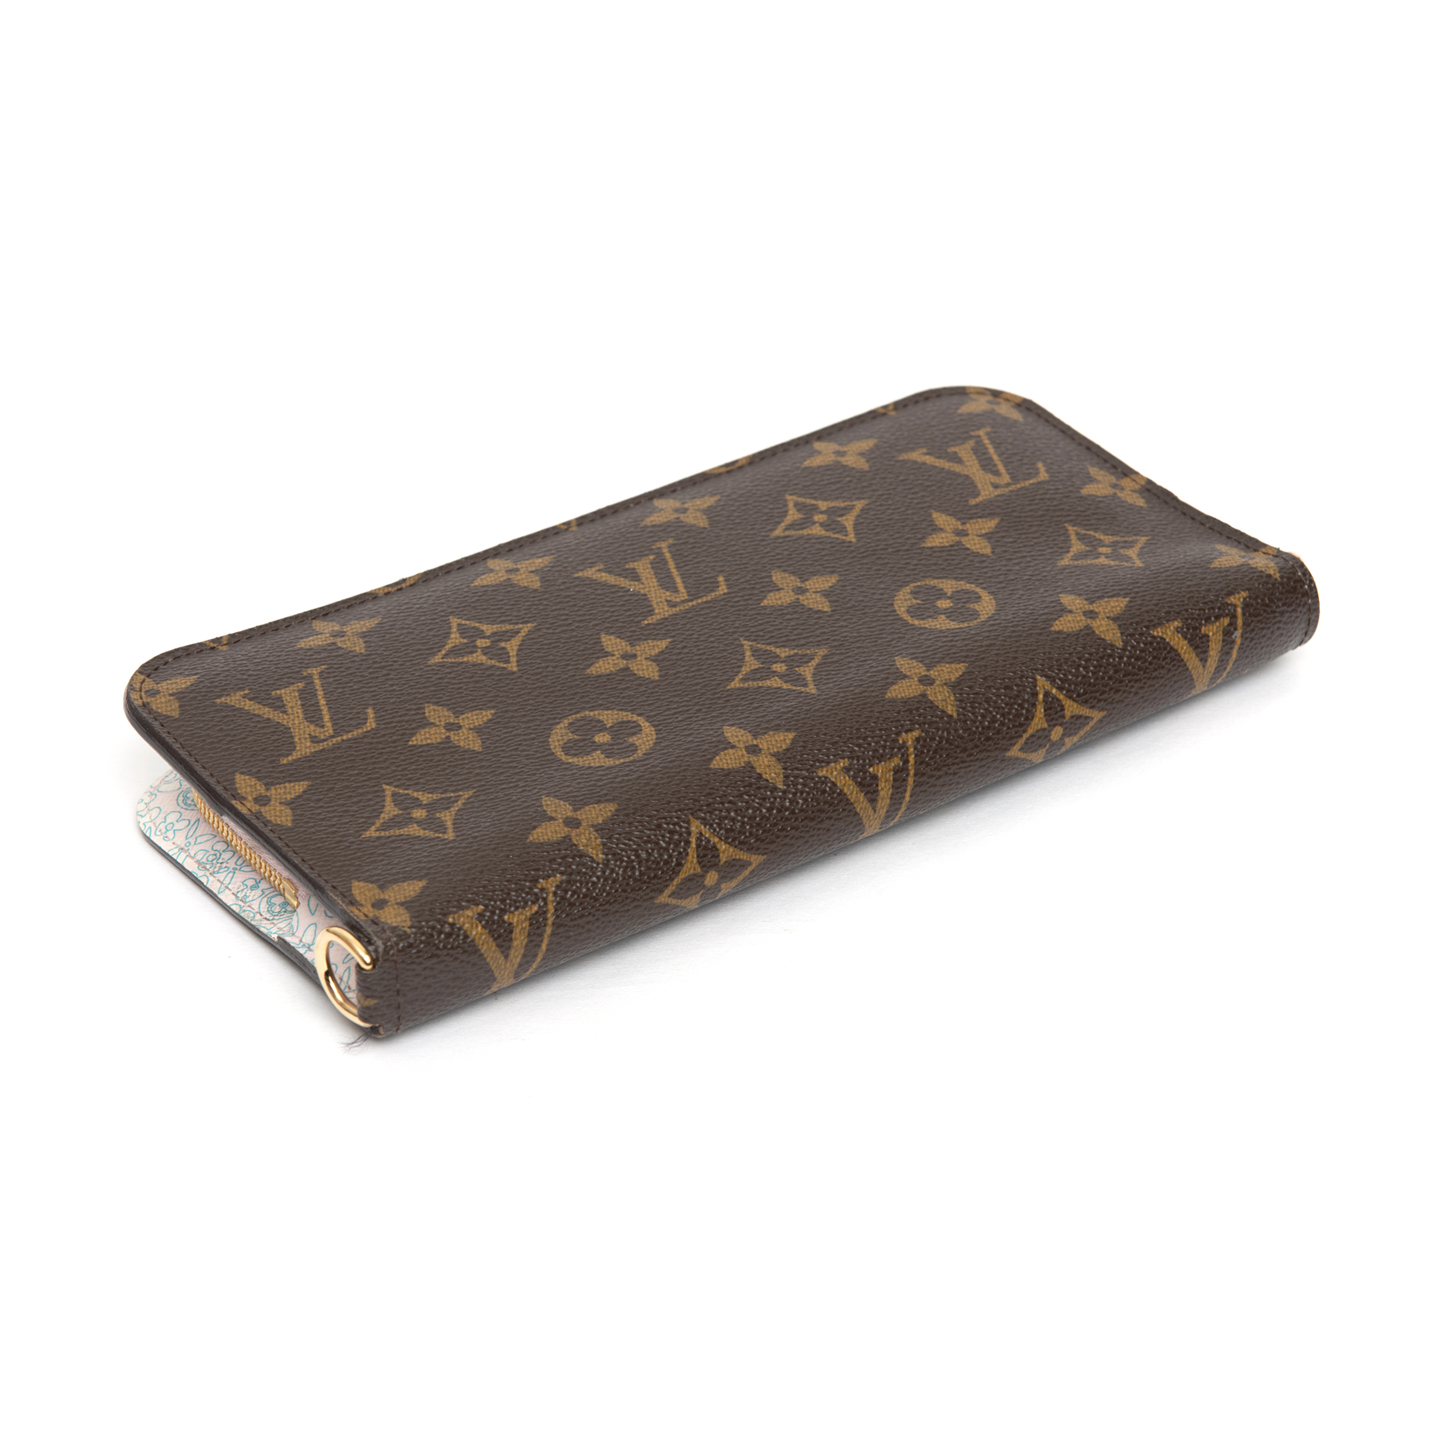 LOUIS VUITTON Monogram Insolite Wallet with Wristlet rt. $825 at 1stDibs